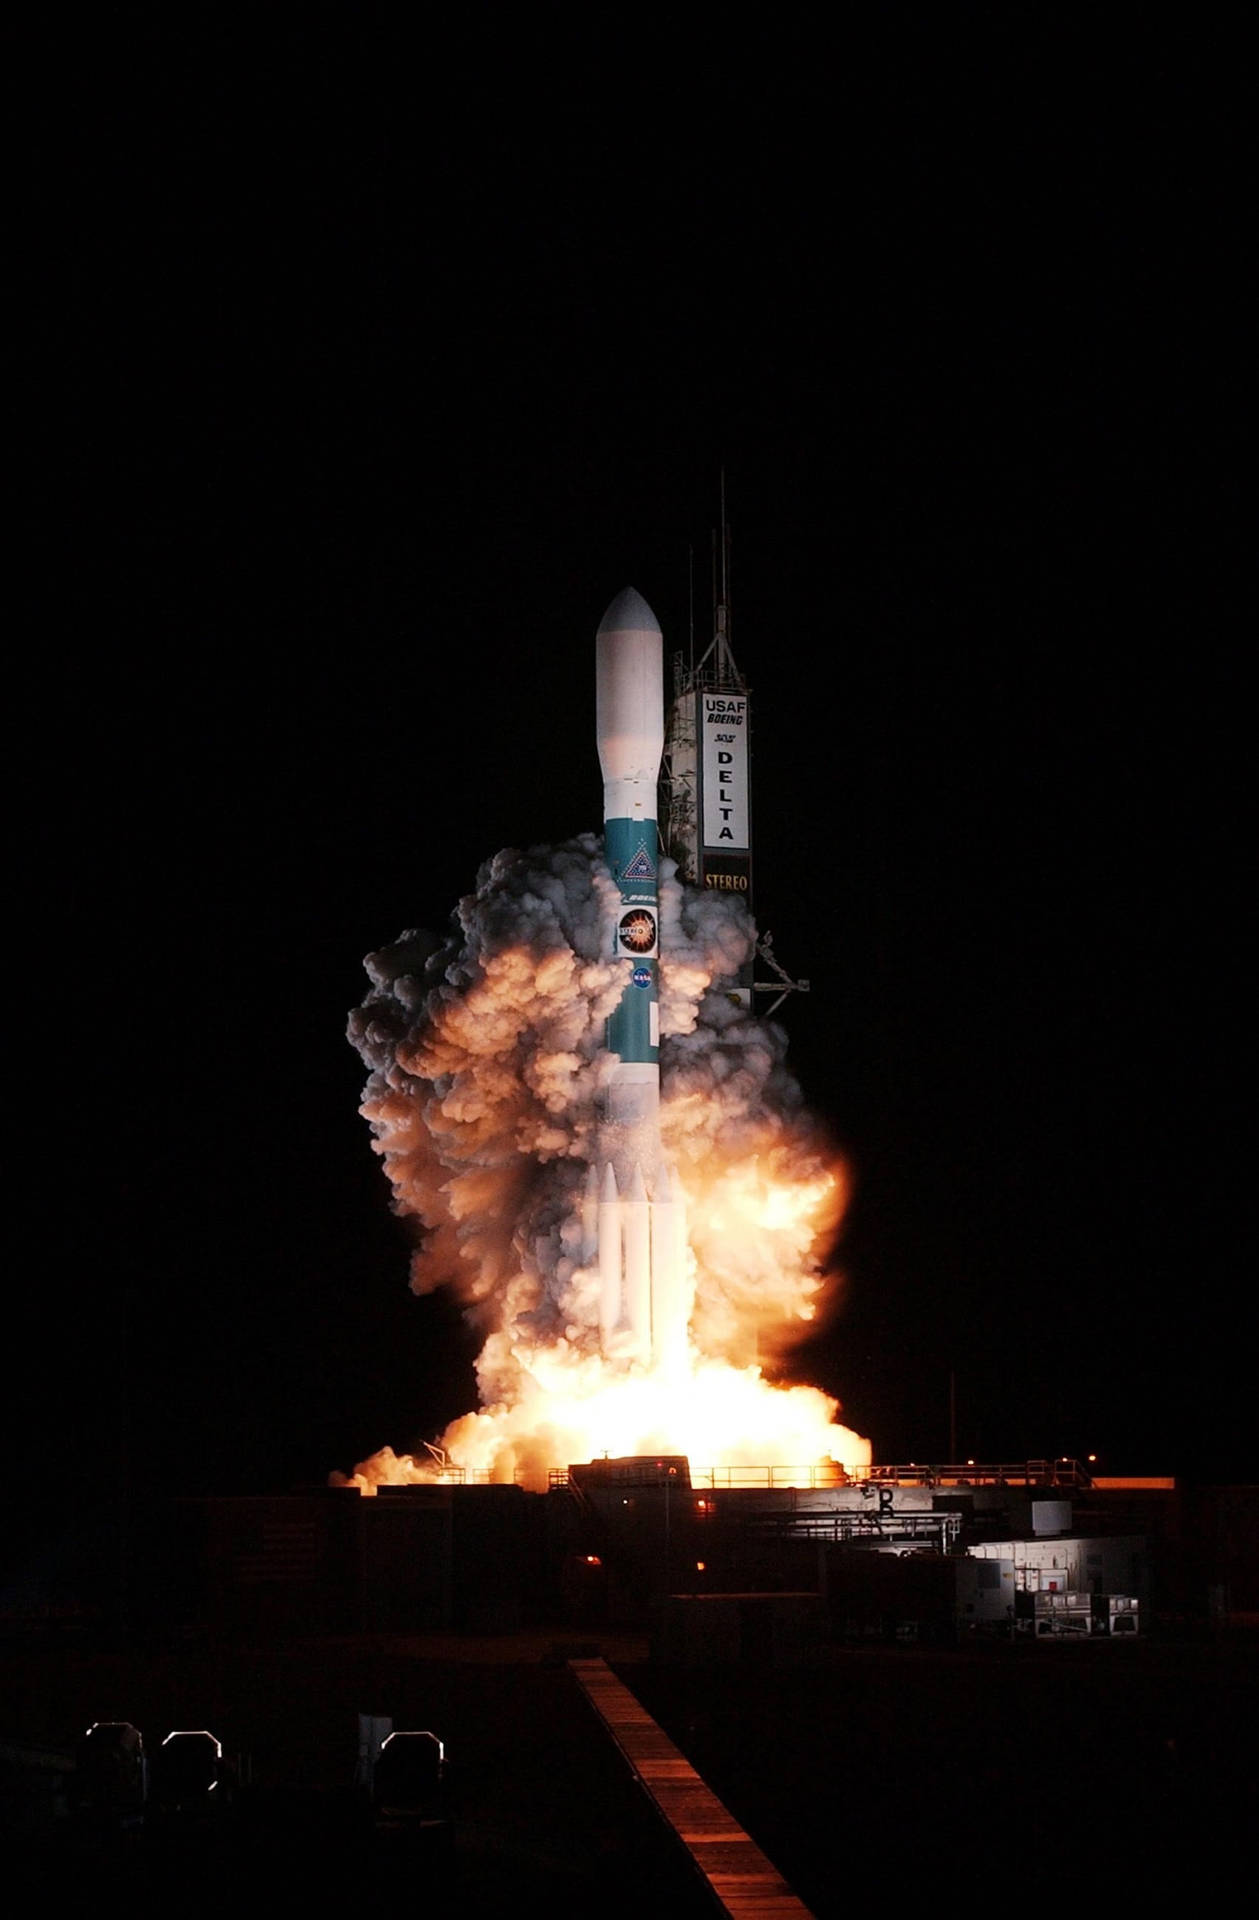 Ignition Of High-temperature Rocket Fuel